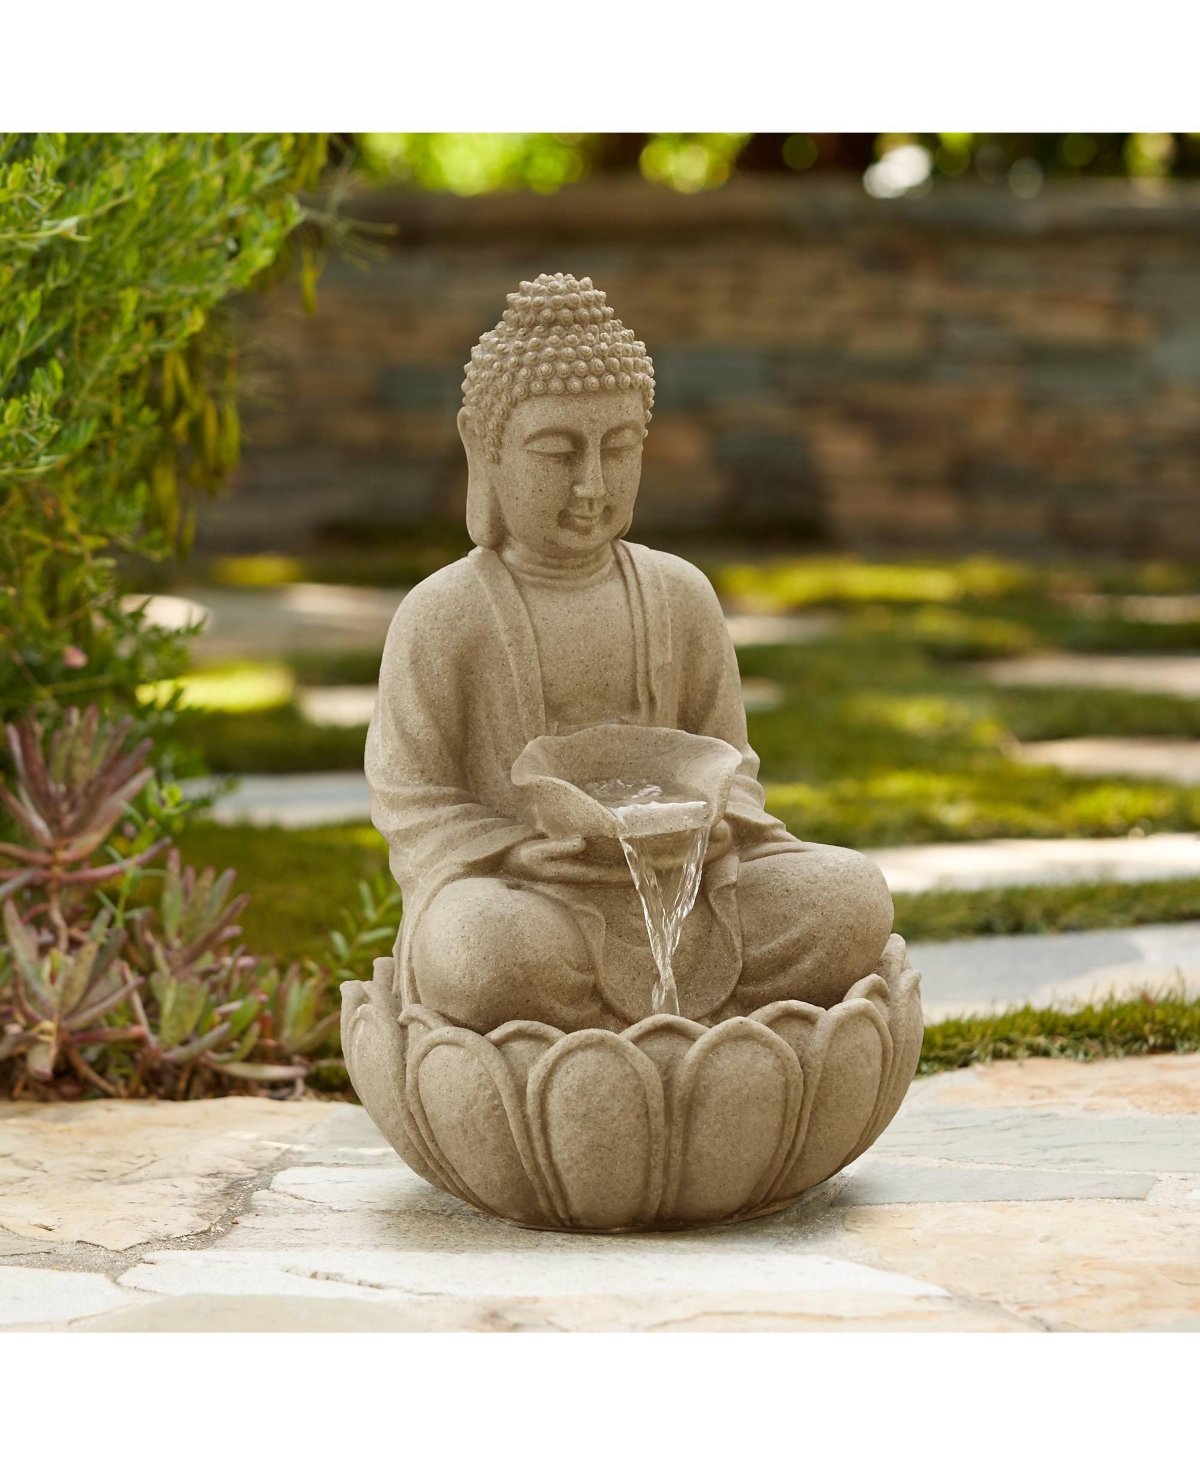 Sitting Buddha Zen Outdoor Water Fountain with Light Led 22" High Faux Sandstone Meditation Decor for Garden Patio Yard Home Lawn Porch House Relaxati